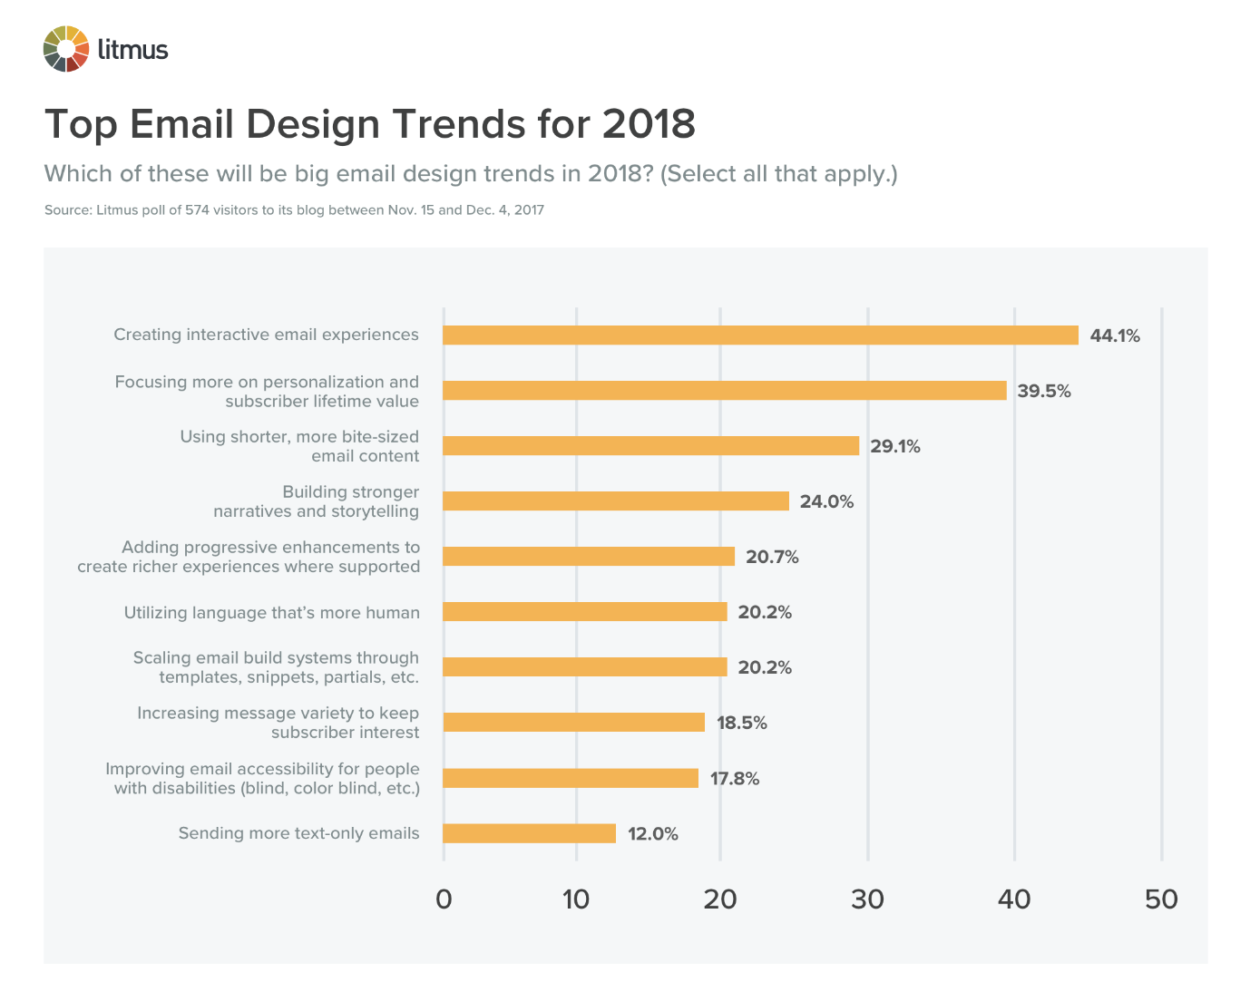 Email design trends report